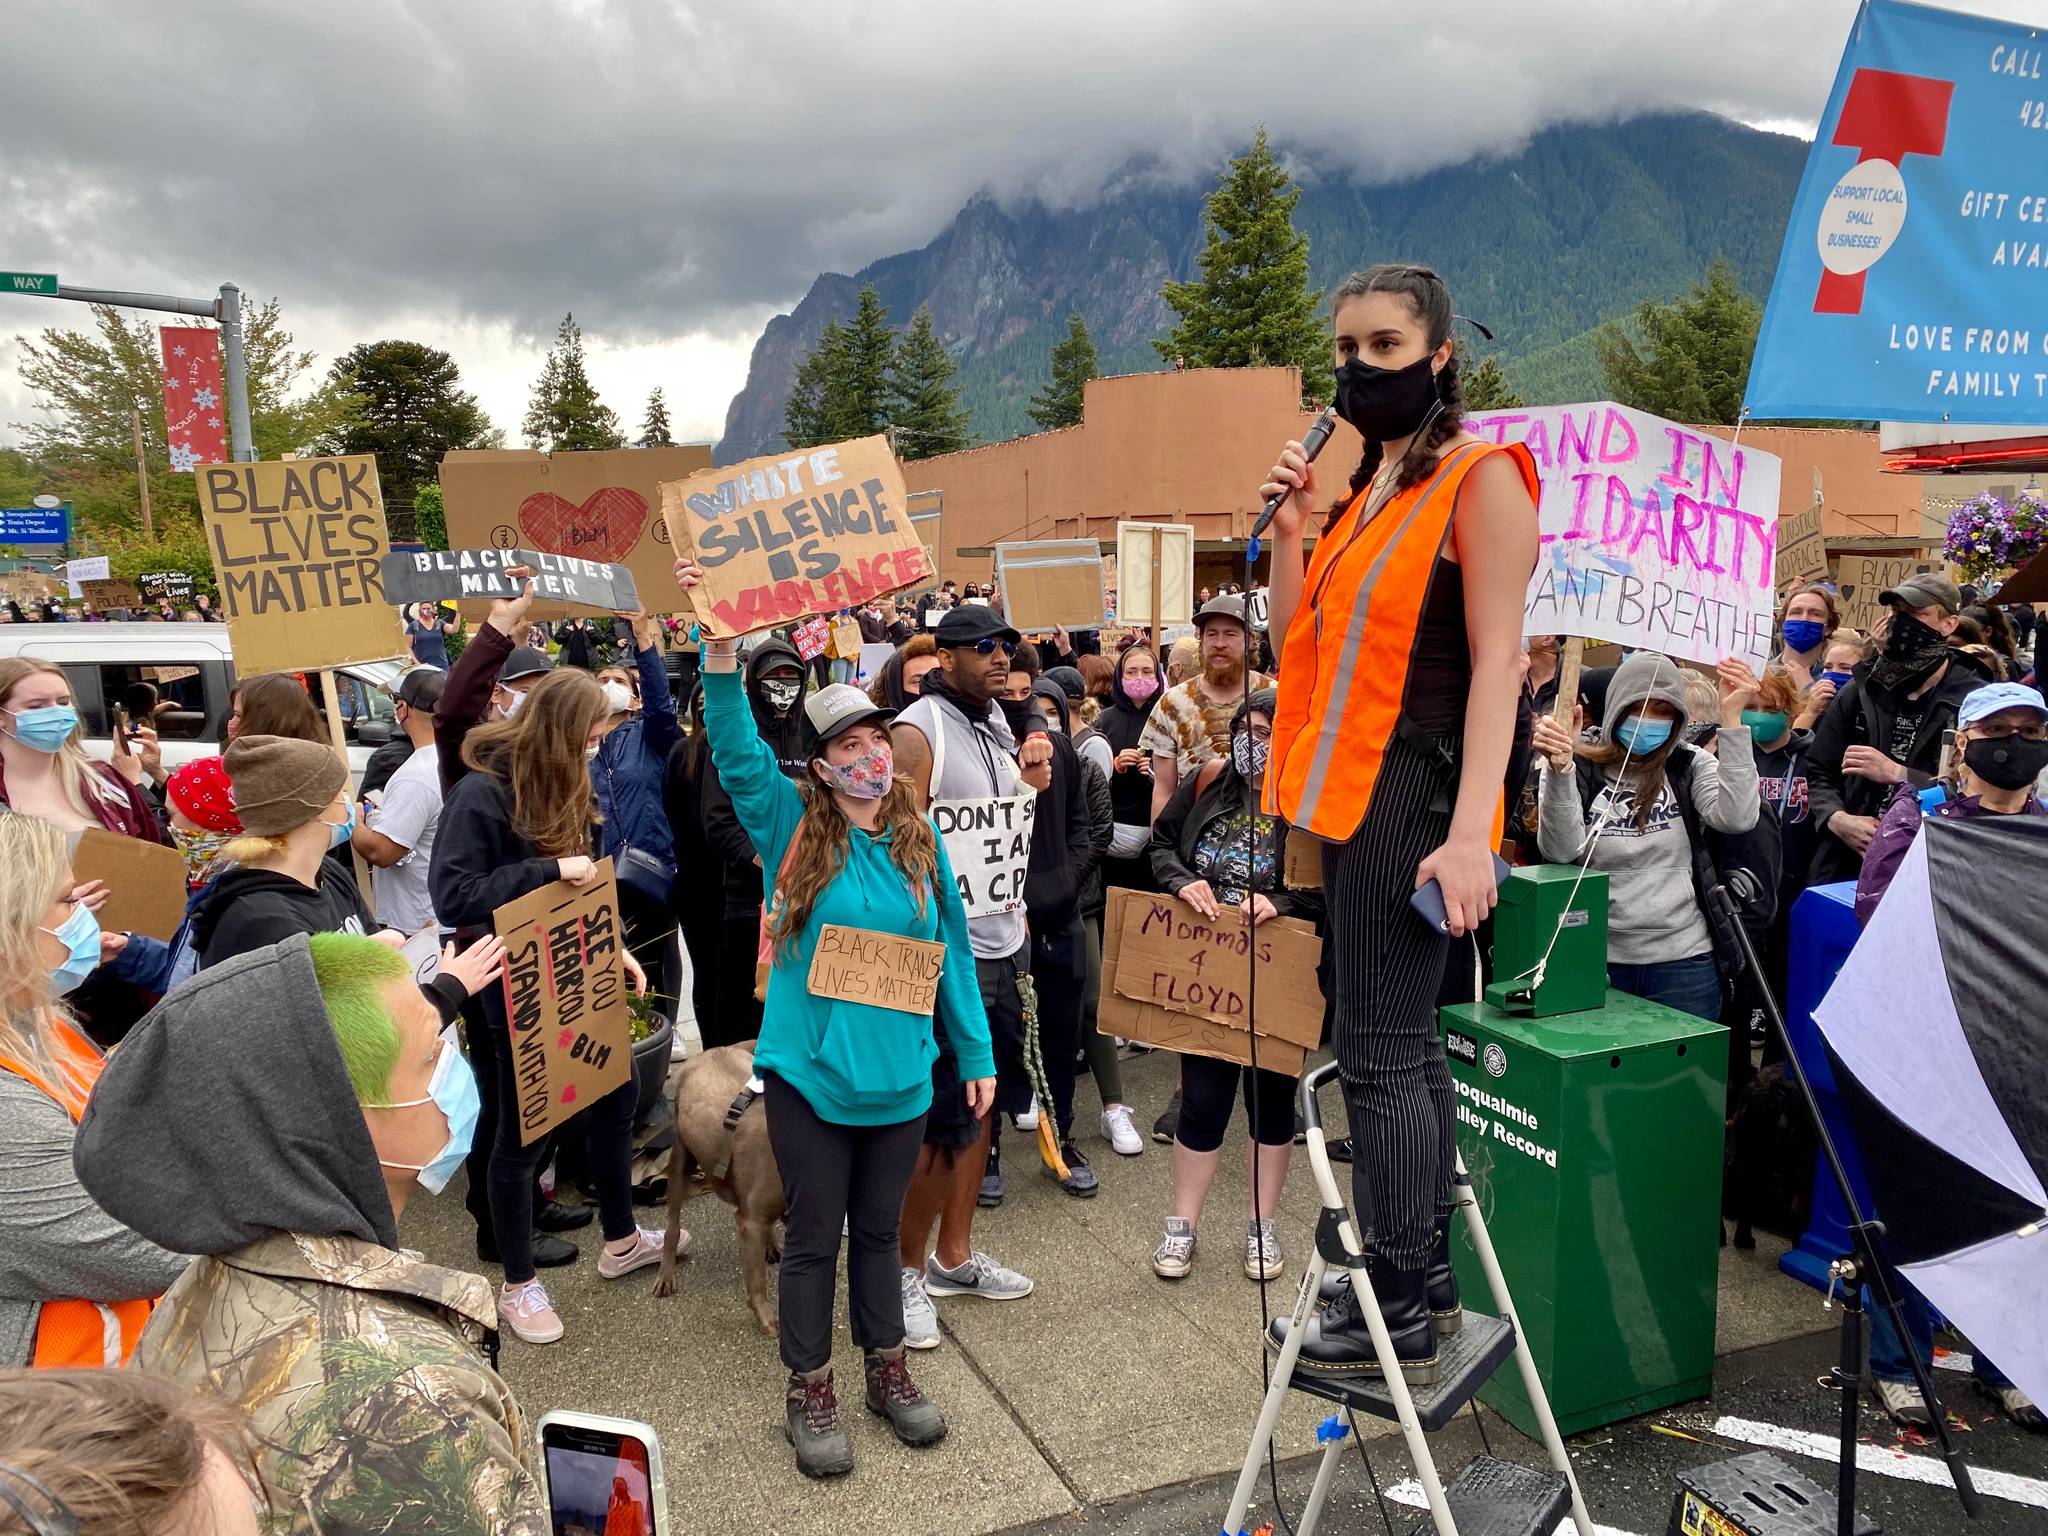 Salma Habashi, pictured here on the ladder, is a Senior at Mt. Si High School. She organized the June 6 march in support of other Black Lives Matter protests happening across the country in an effort to educate people. Photo contributed by Noha Habashi.